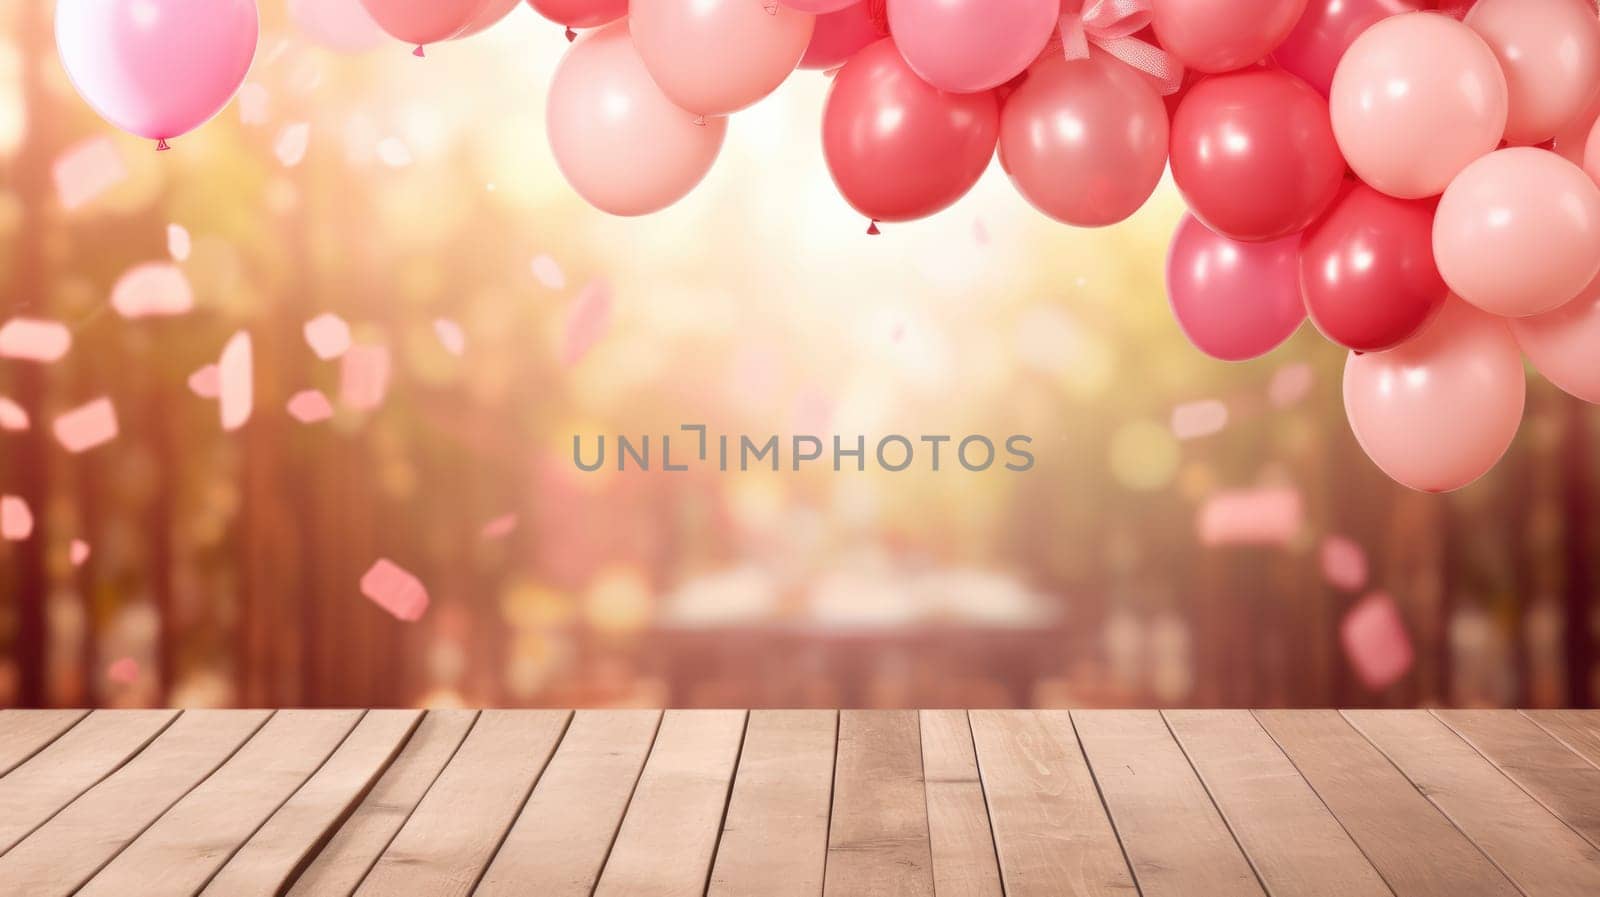 Empty wooden table in the foreground. Blurred background with pink balloons AI